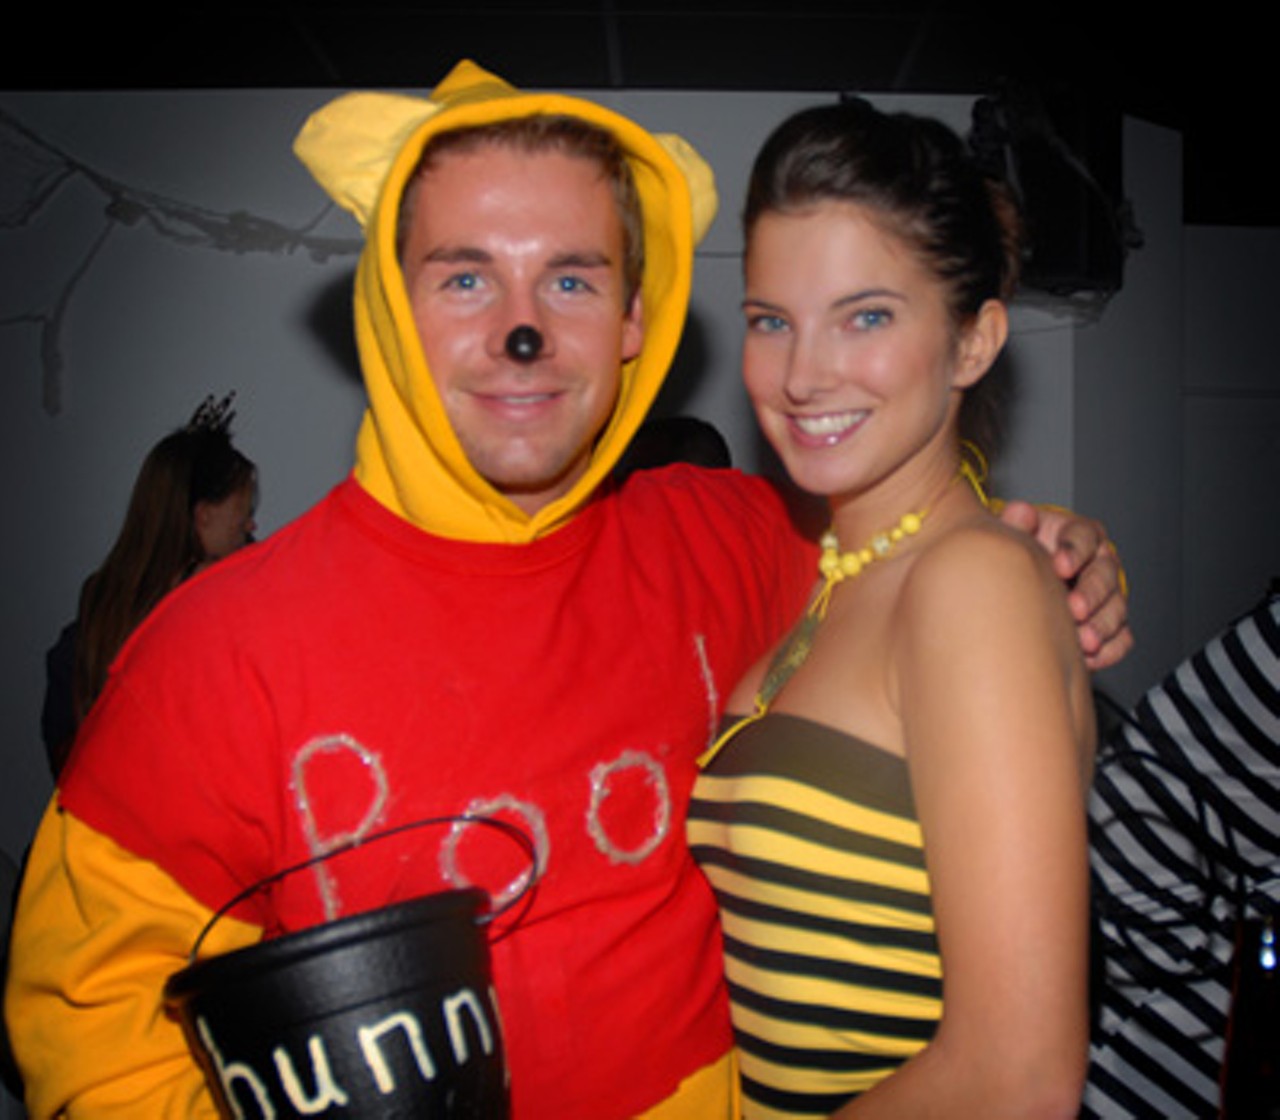 Pooh (Caleb Watters) and the Honey Bee (Erica Schlemmel) have the same interests at Sugar Lounge.